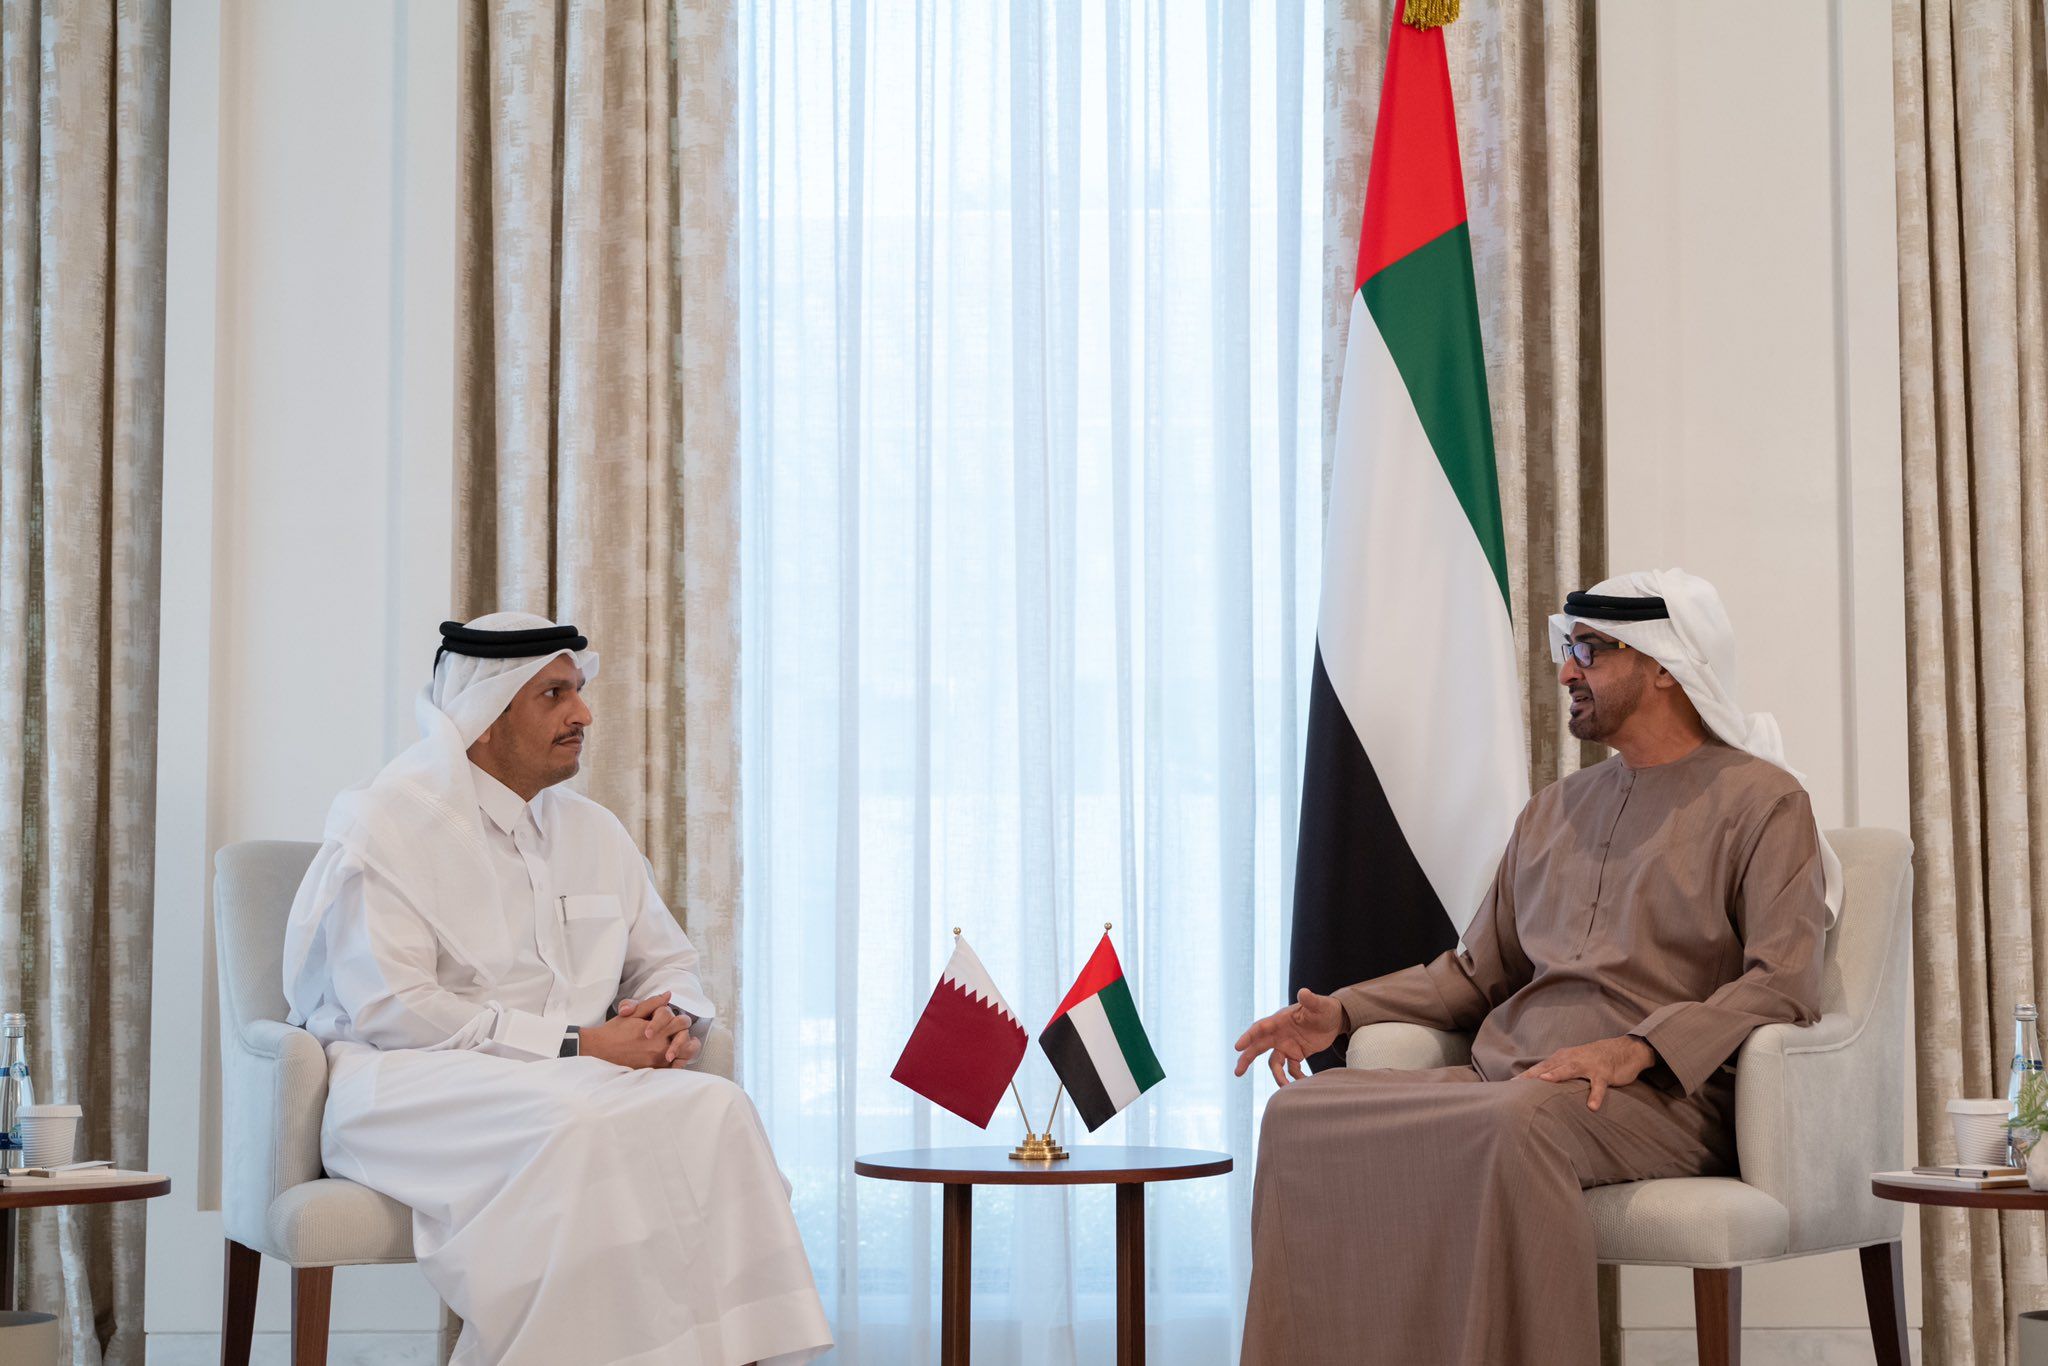 Turkey and UAE Seek “Rapprochement” in the Middle East